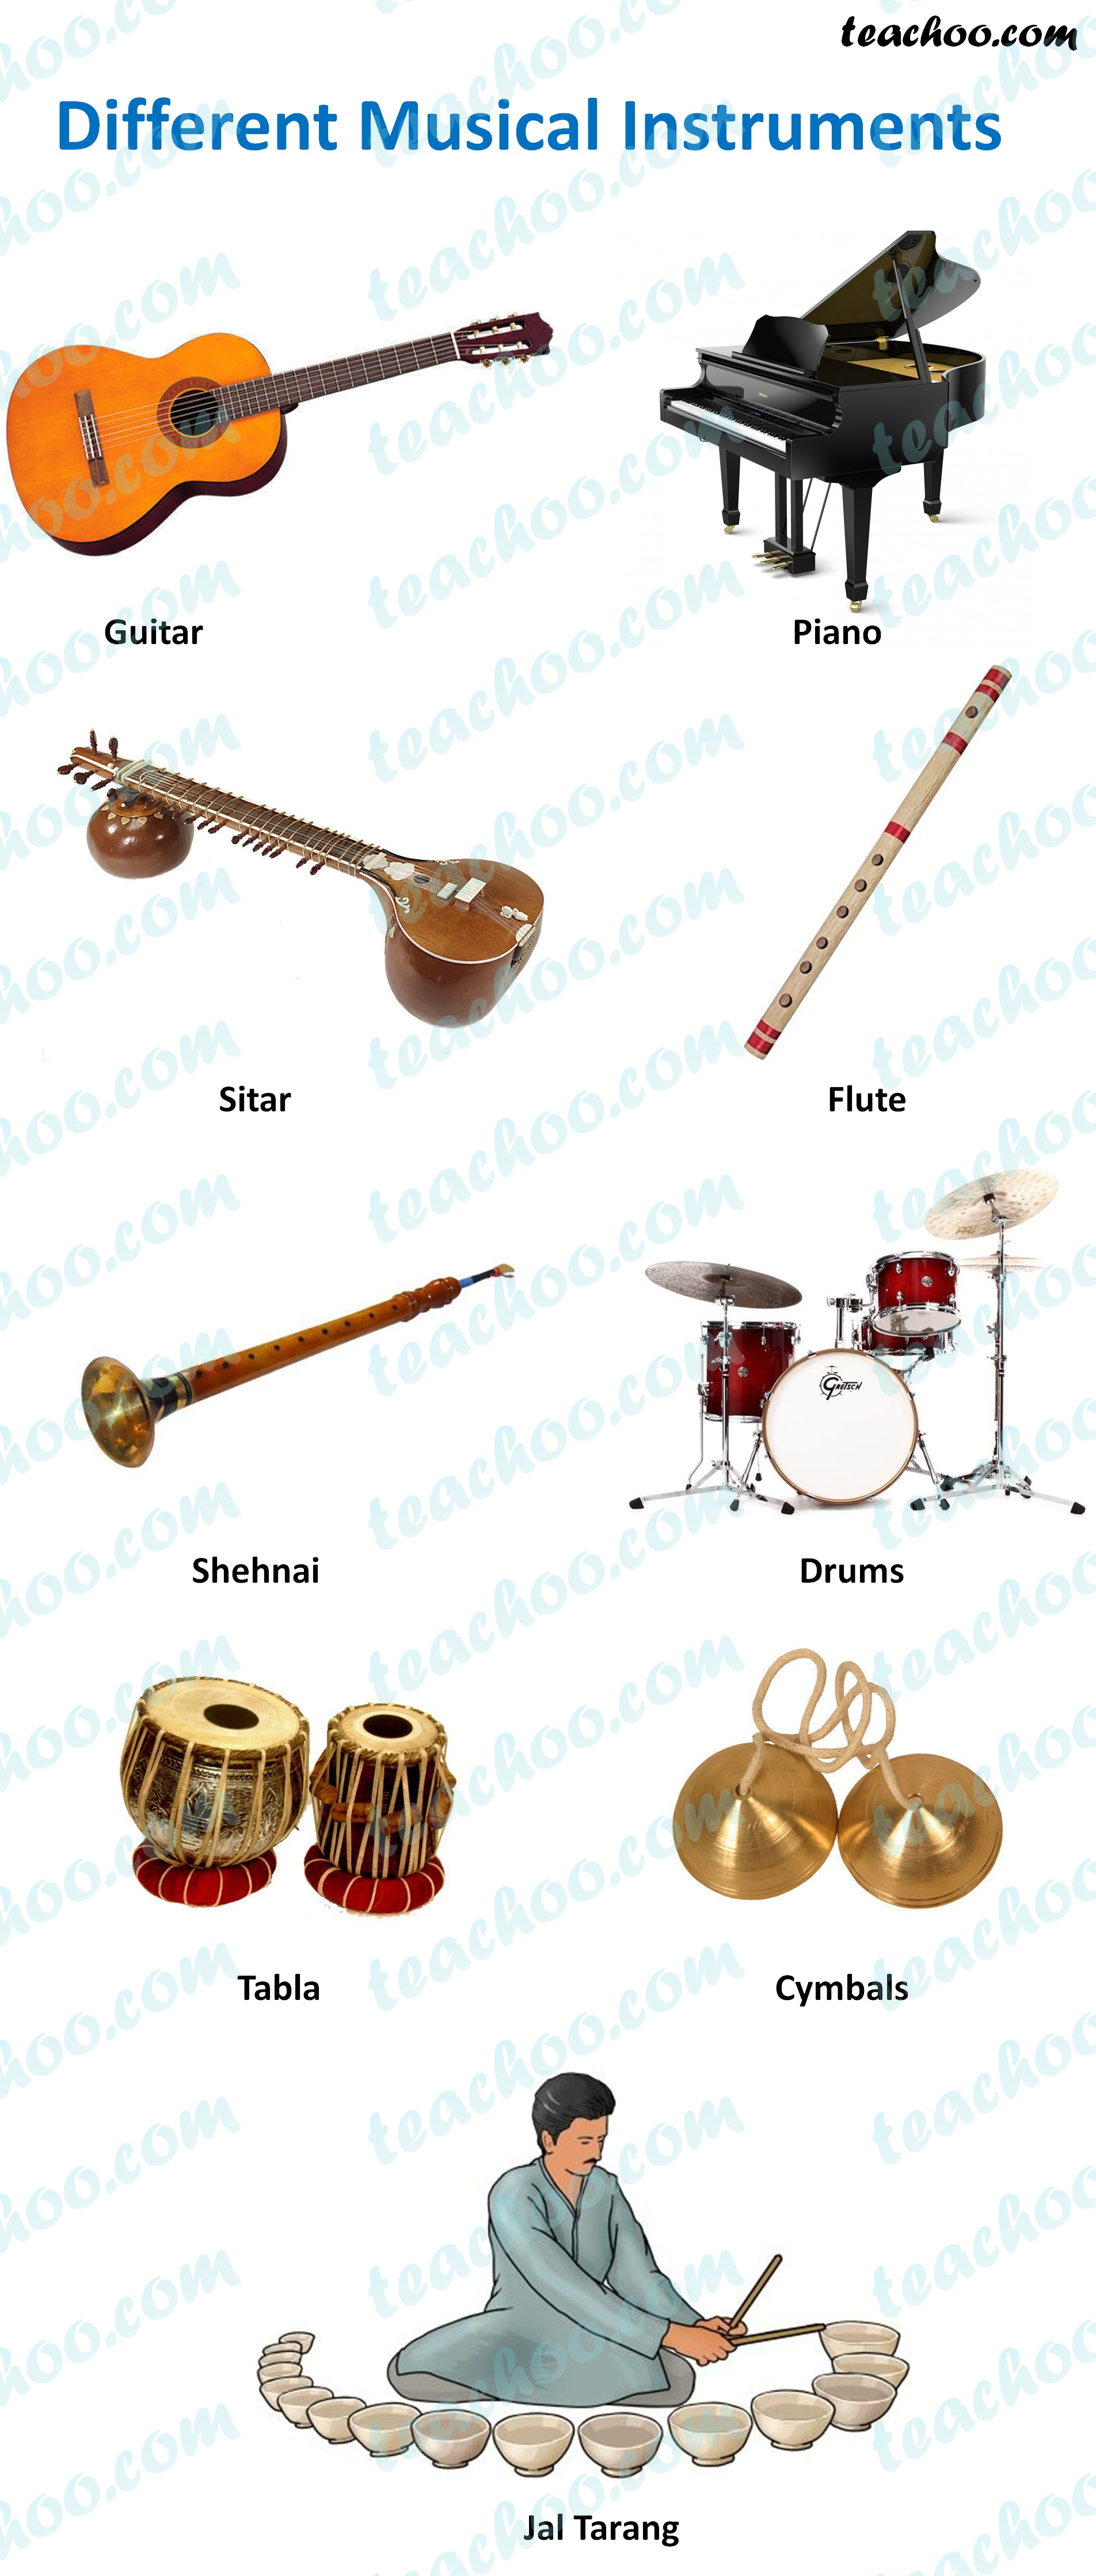 journey of musical instruments from traditional to modern